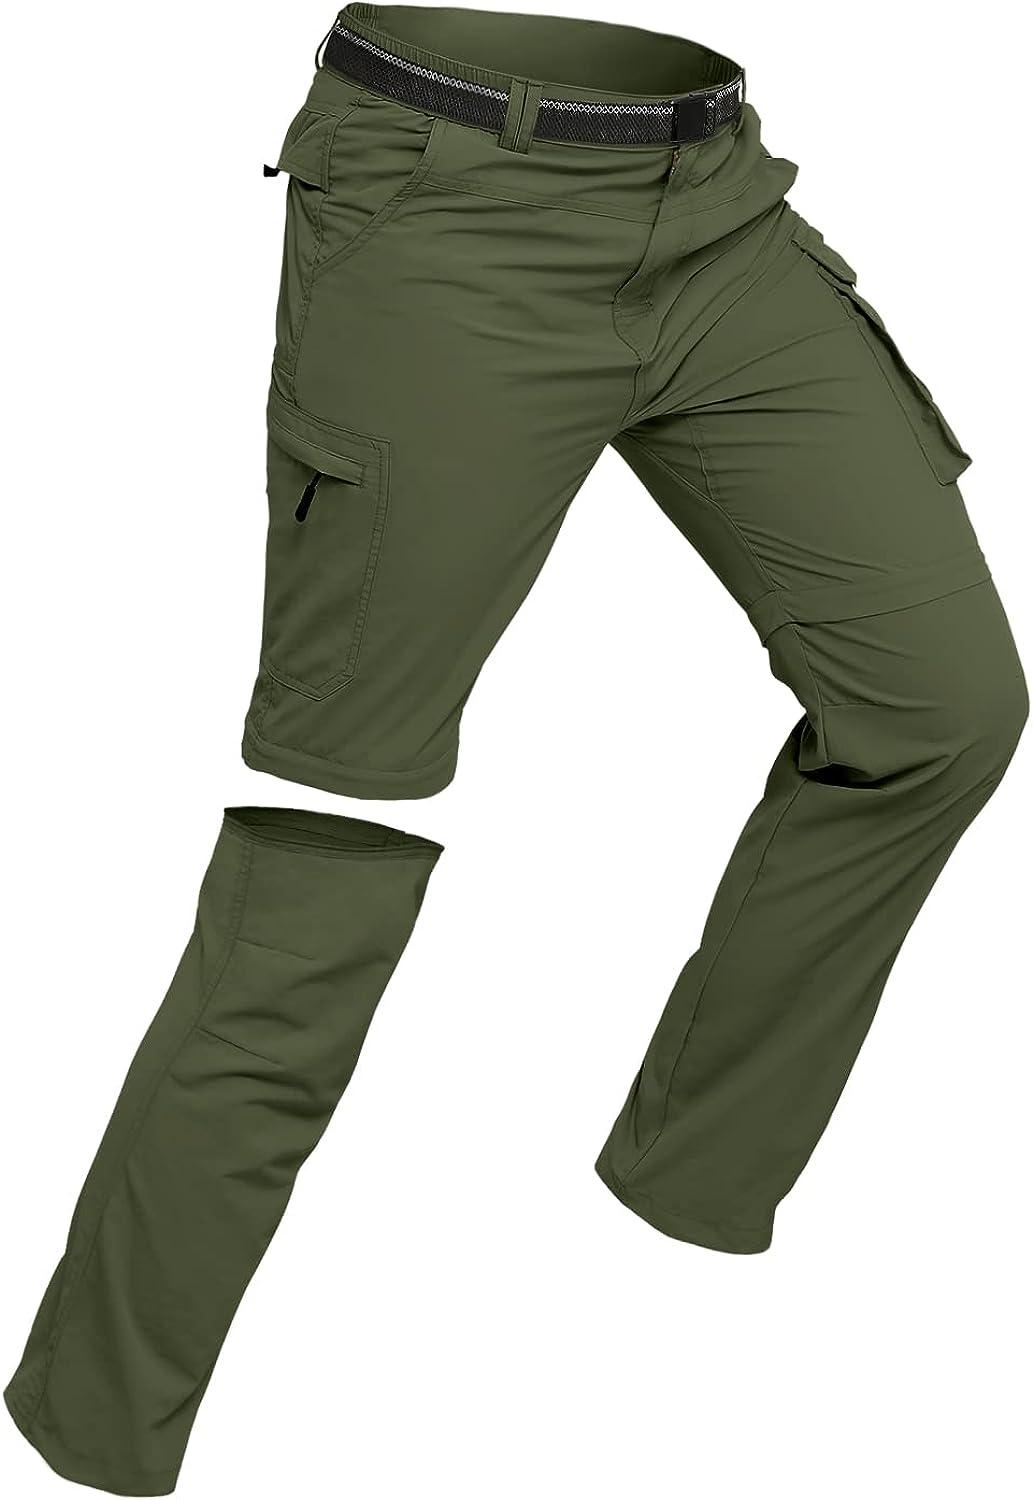 Cargopants Mens Tactical Army Pants Waterproof Combat Trousers Outdoor  Hiking